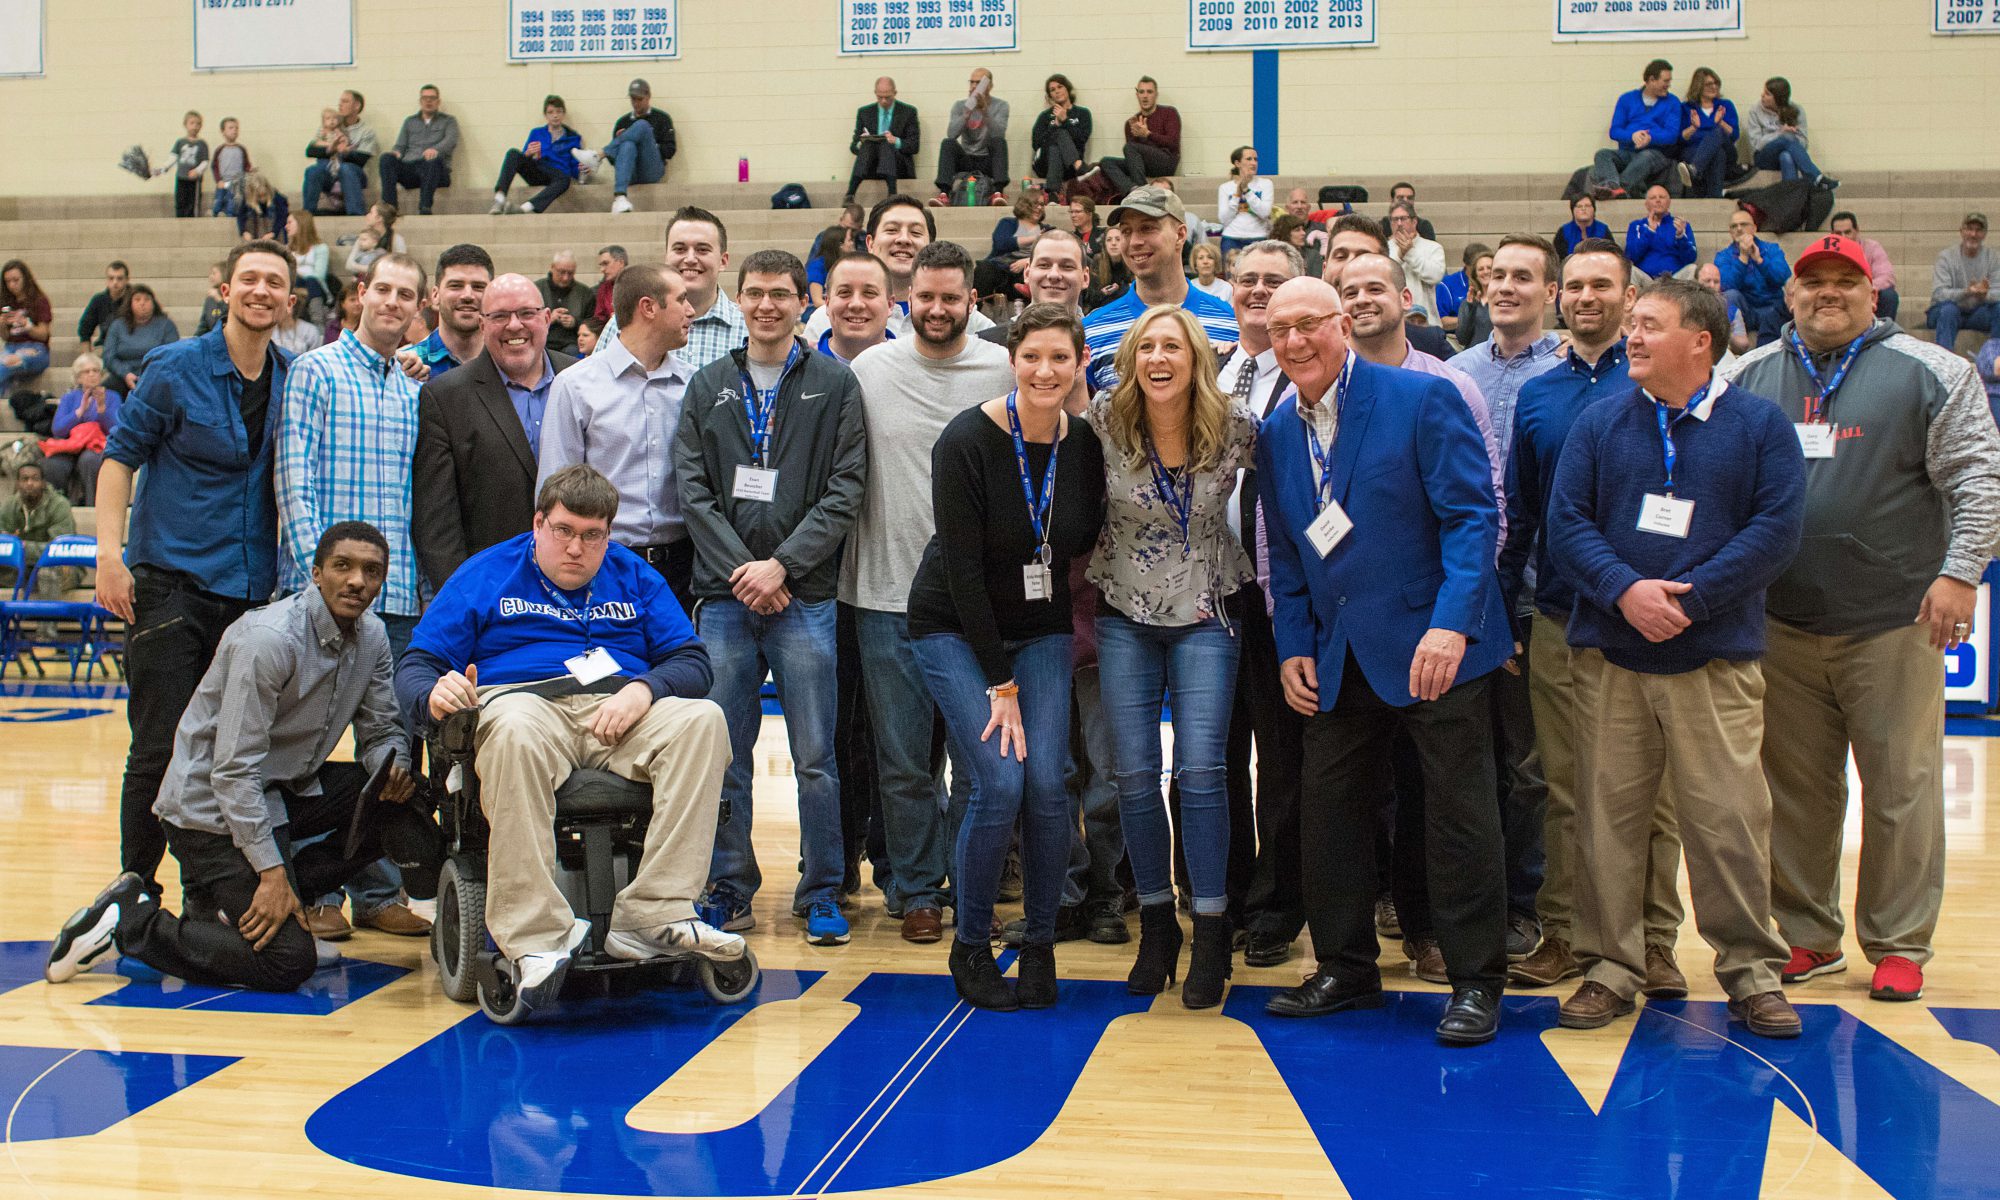 The 2017 Hall of Fame inductees were introduced Friday night during CIT.